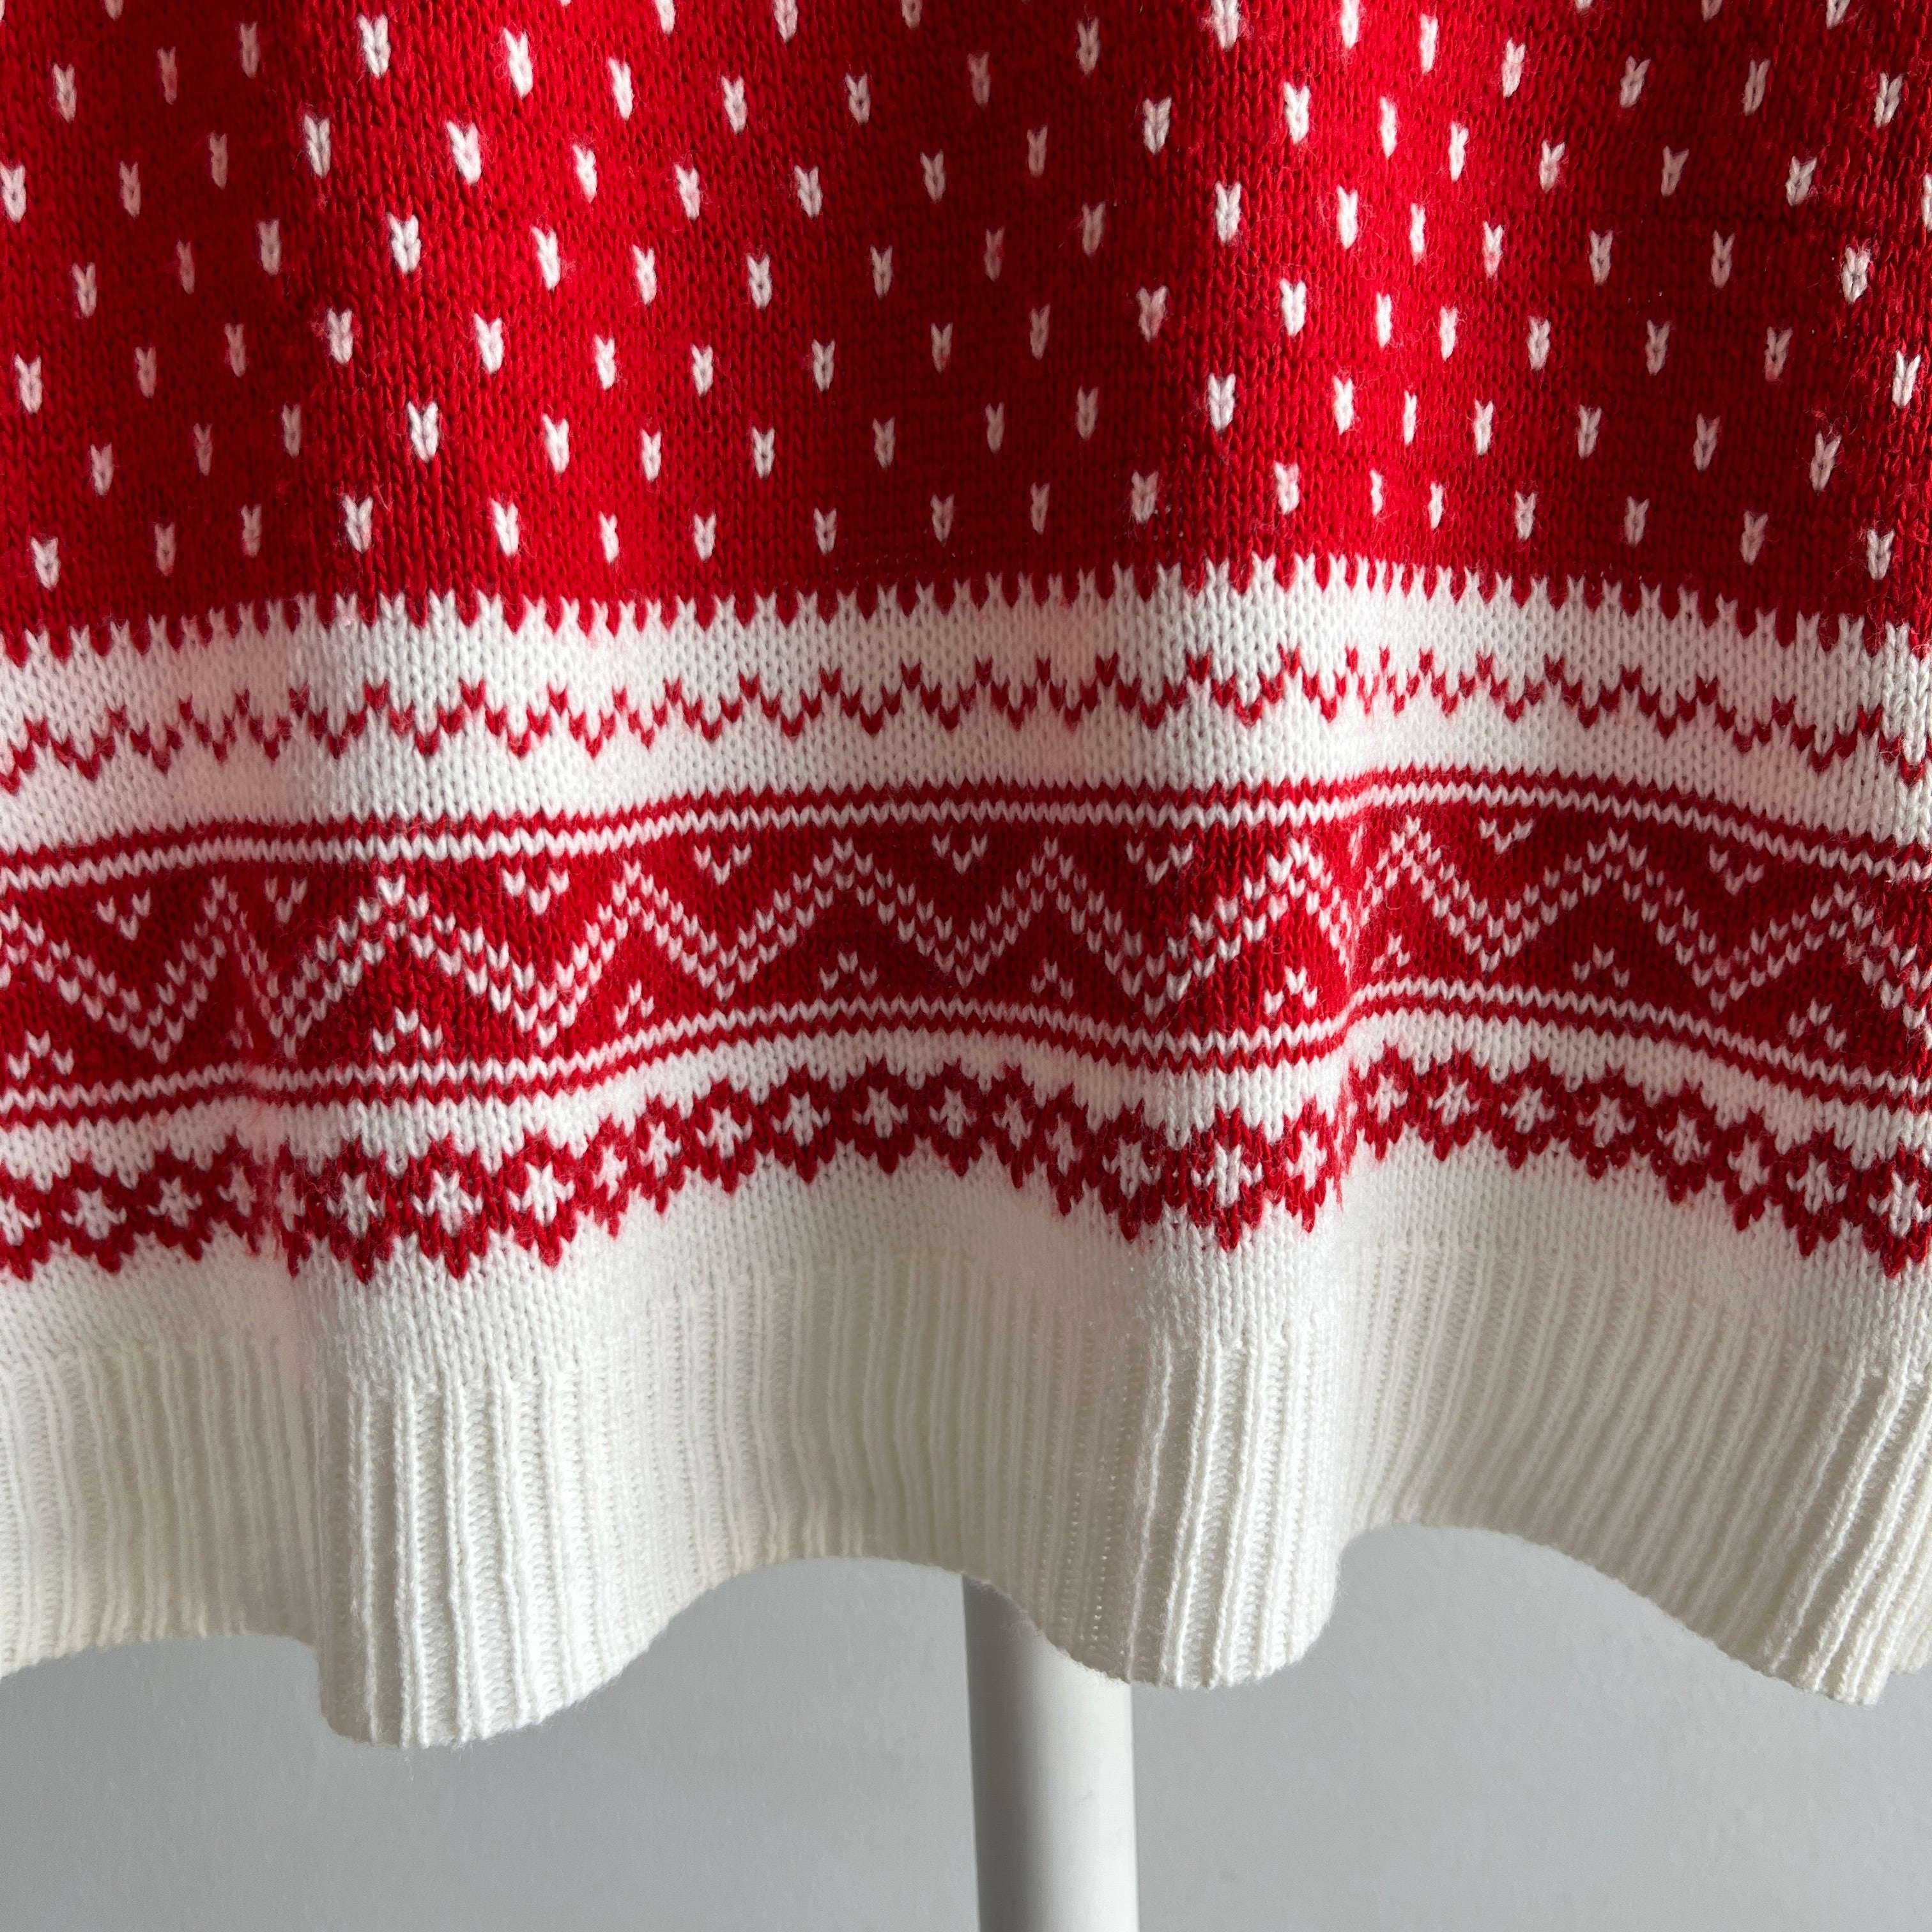 1980s Acrylic Red and White Snow Flake Sweater